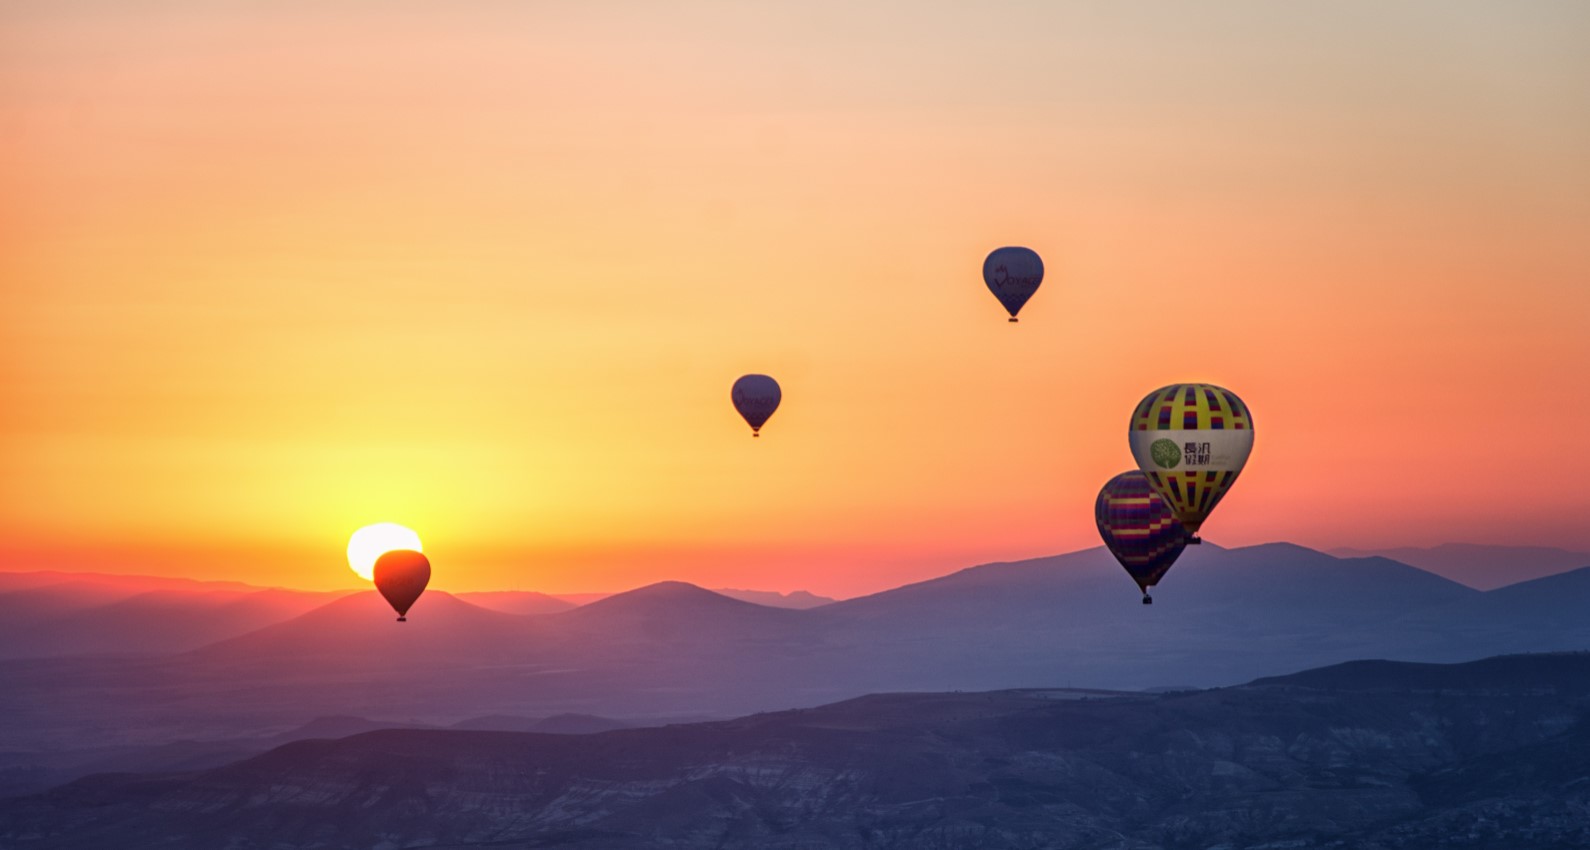 assorted-hot-air-balloons-photo-during-sunset-670061